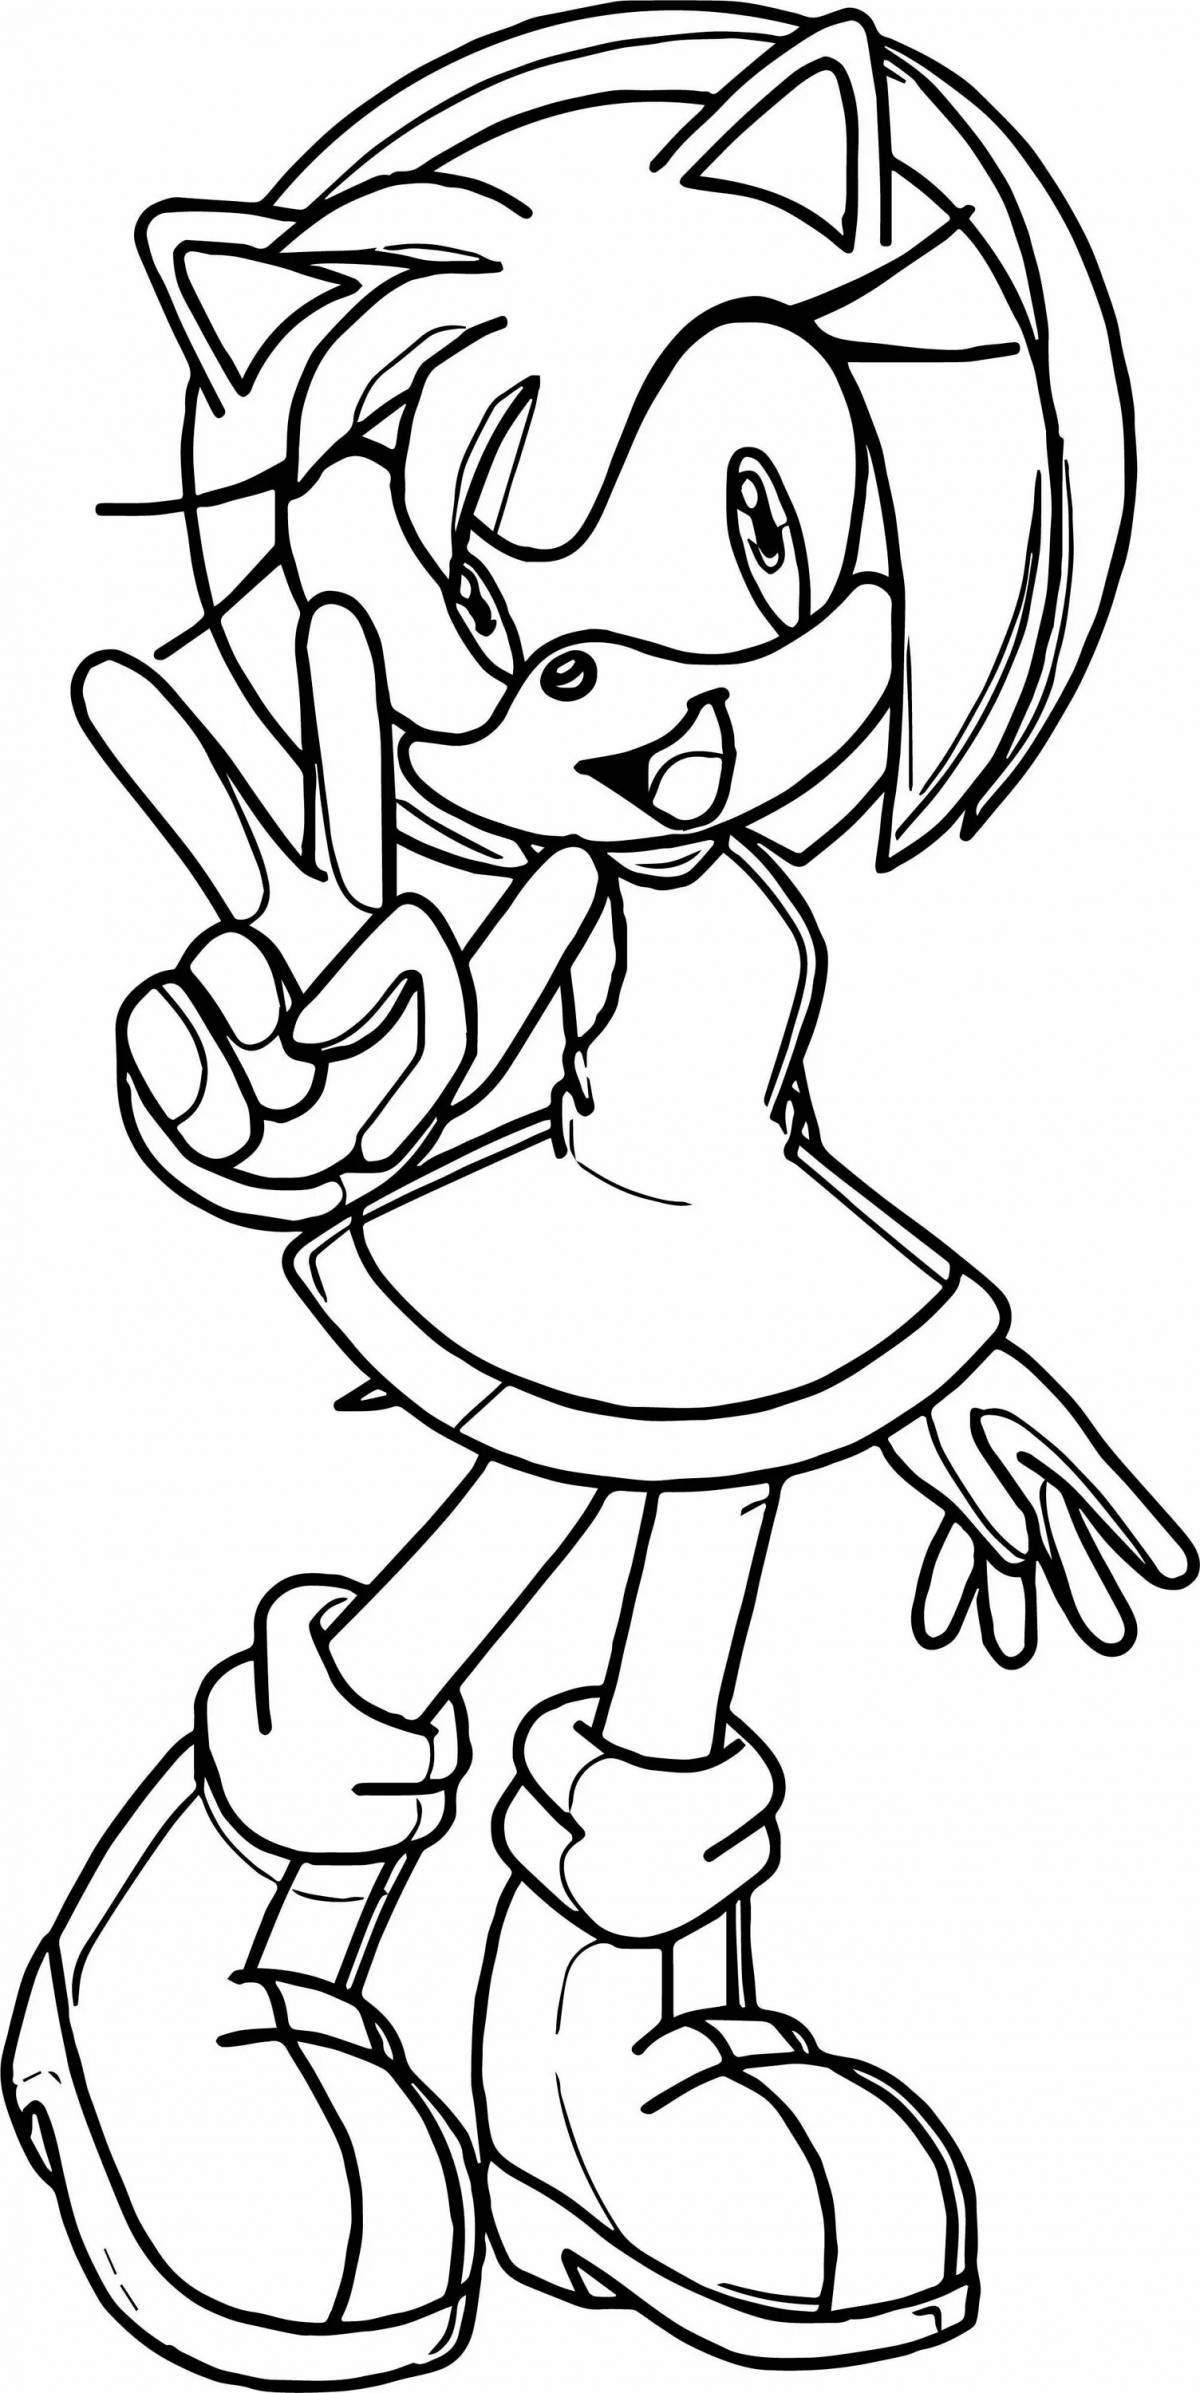 Sonic amy attractive coloring